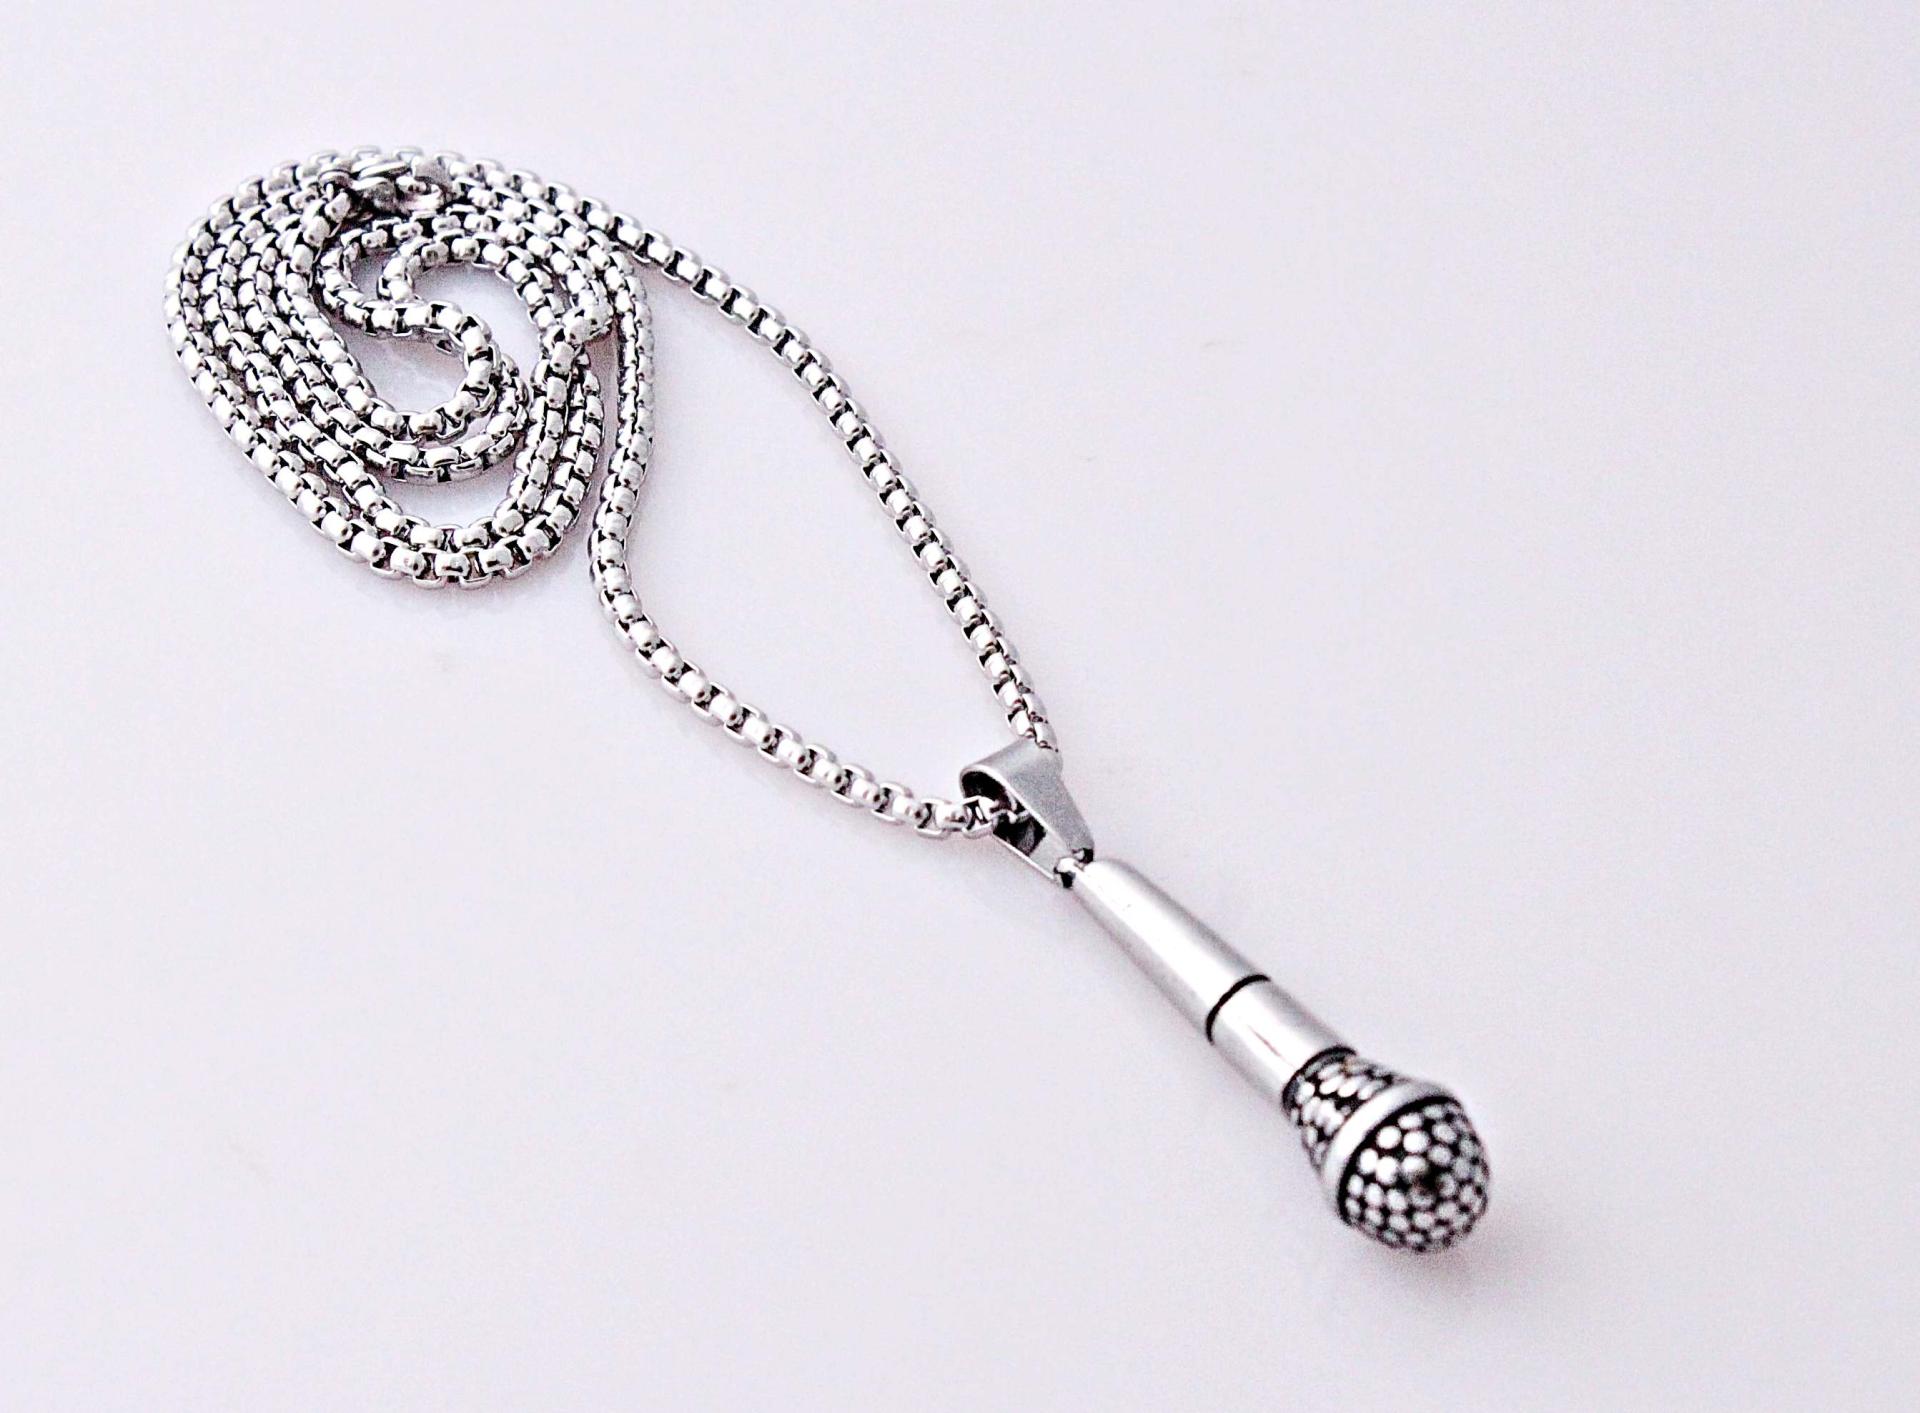 Microphone Necklace Stainless Steel in Black or Silver